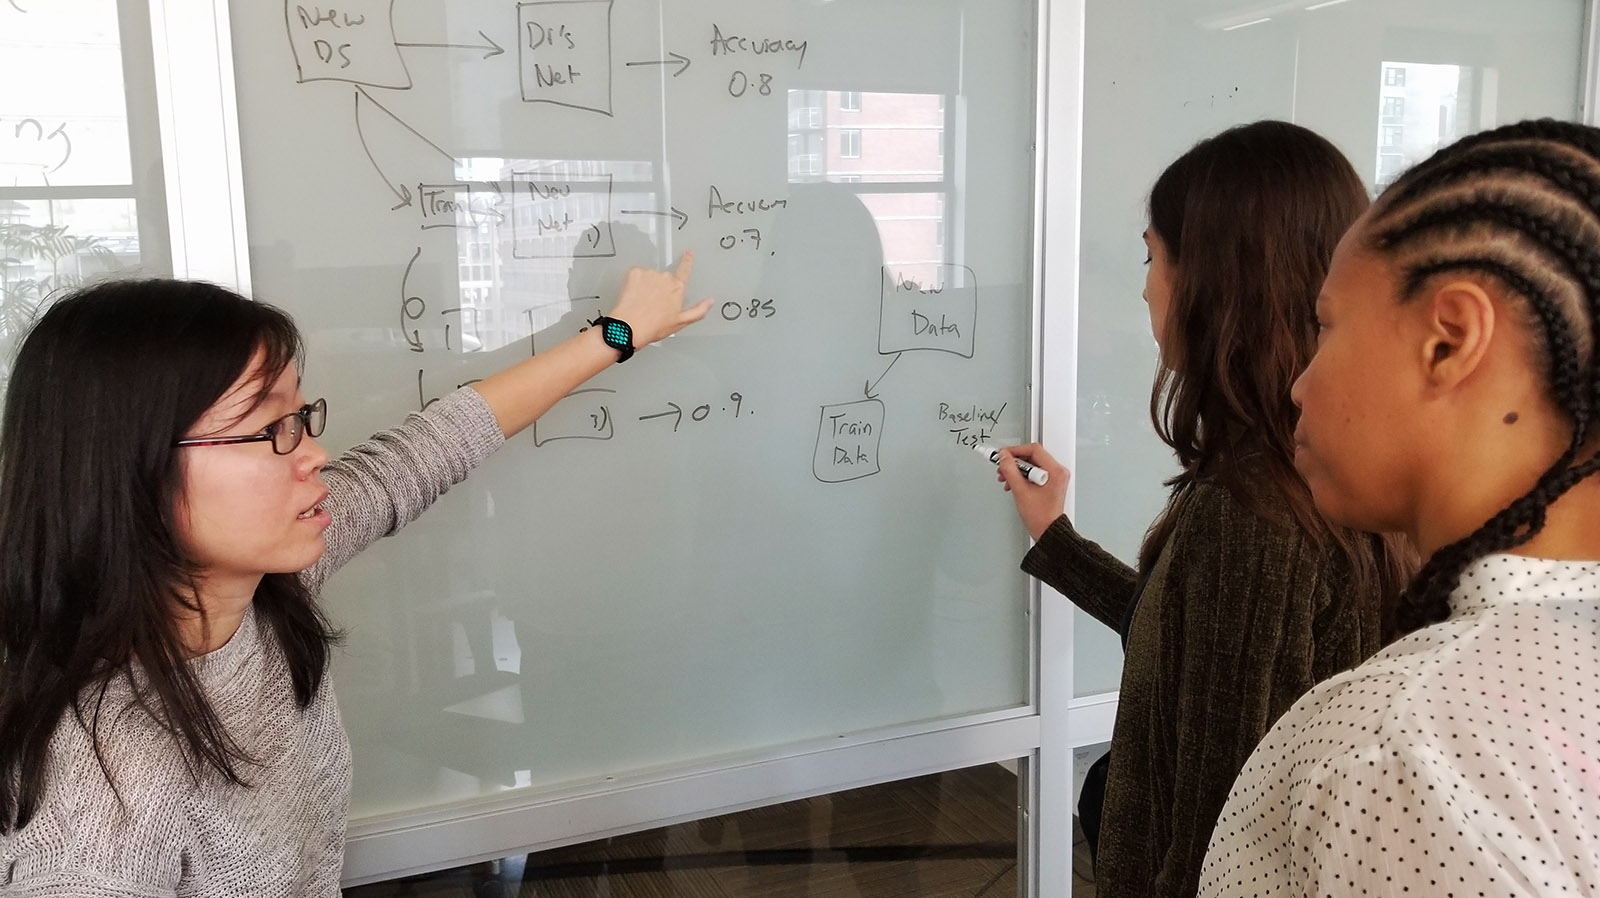 Women stand around a whiteboard with references to neural nets on it